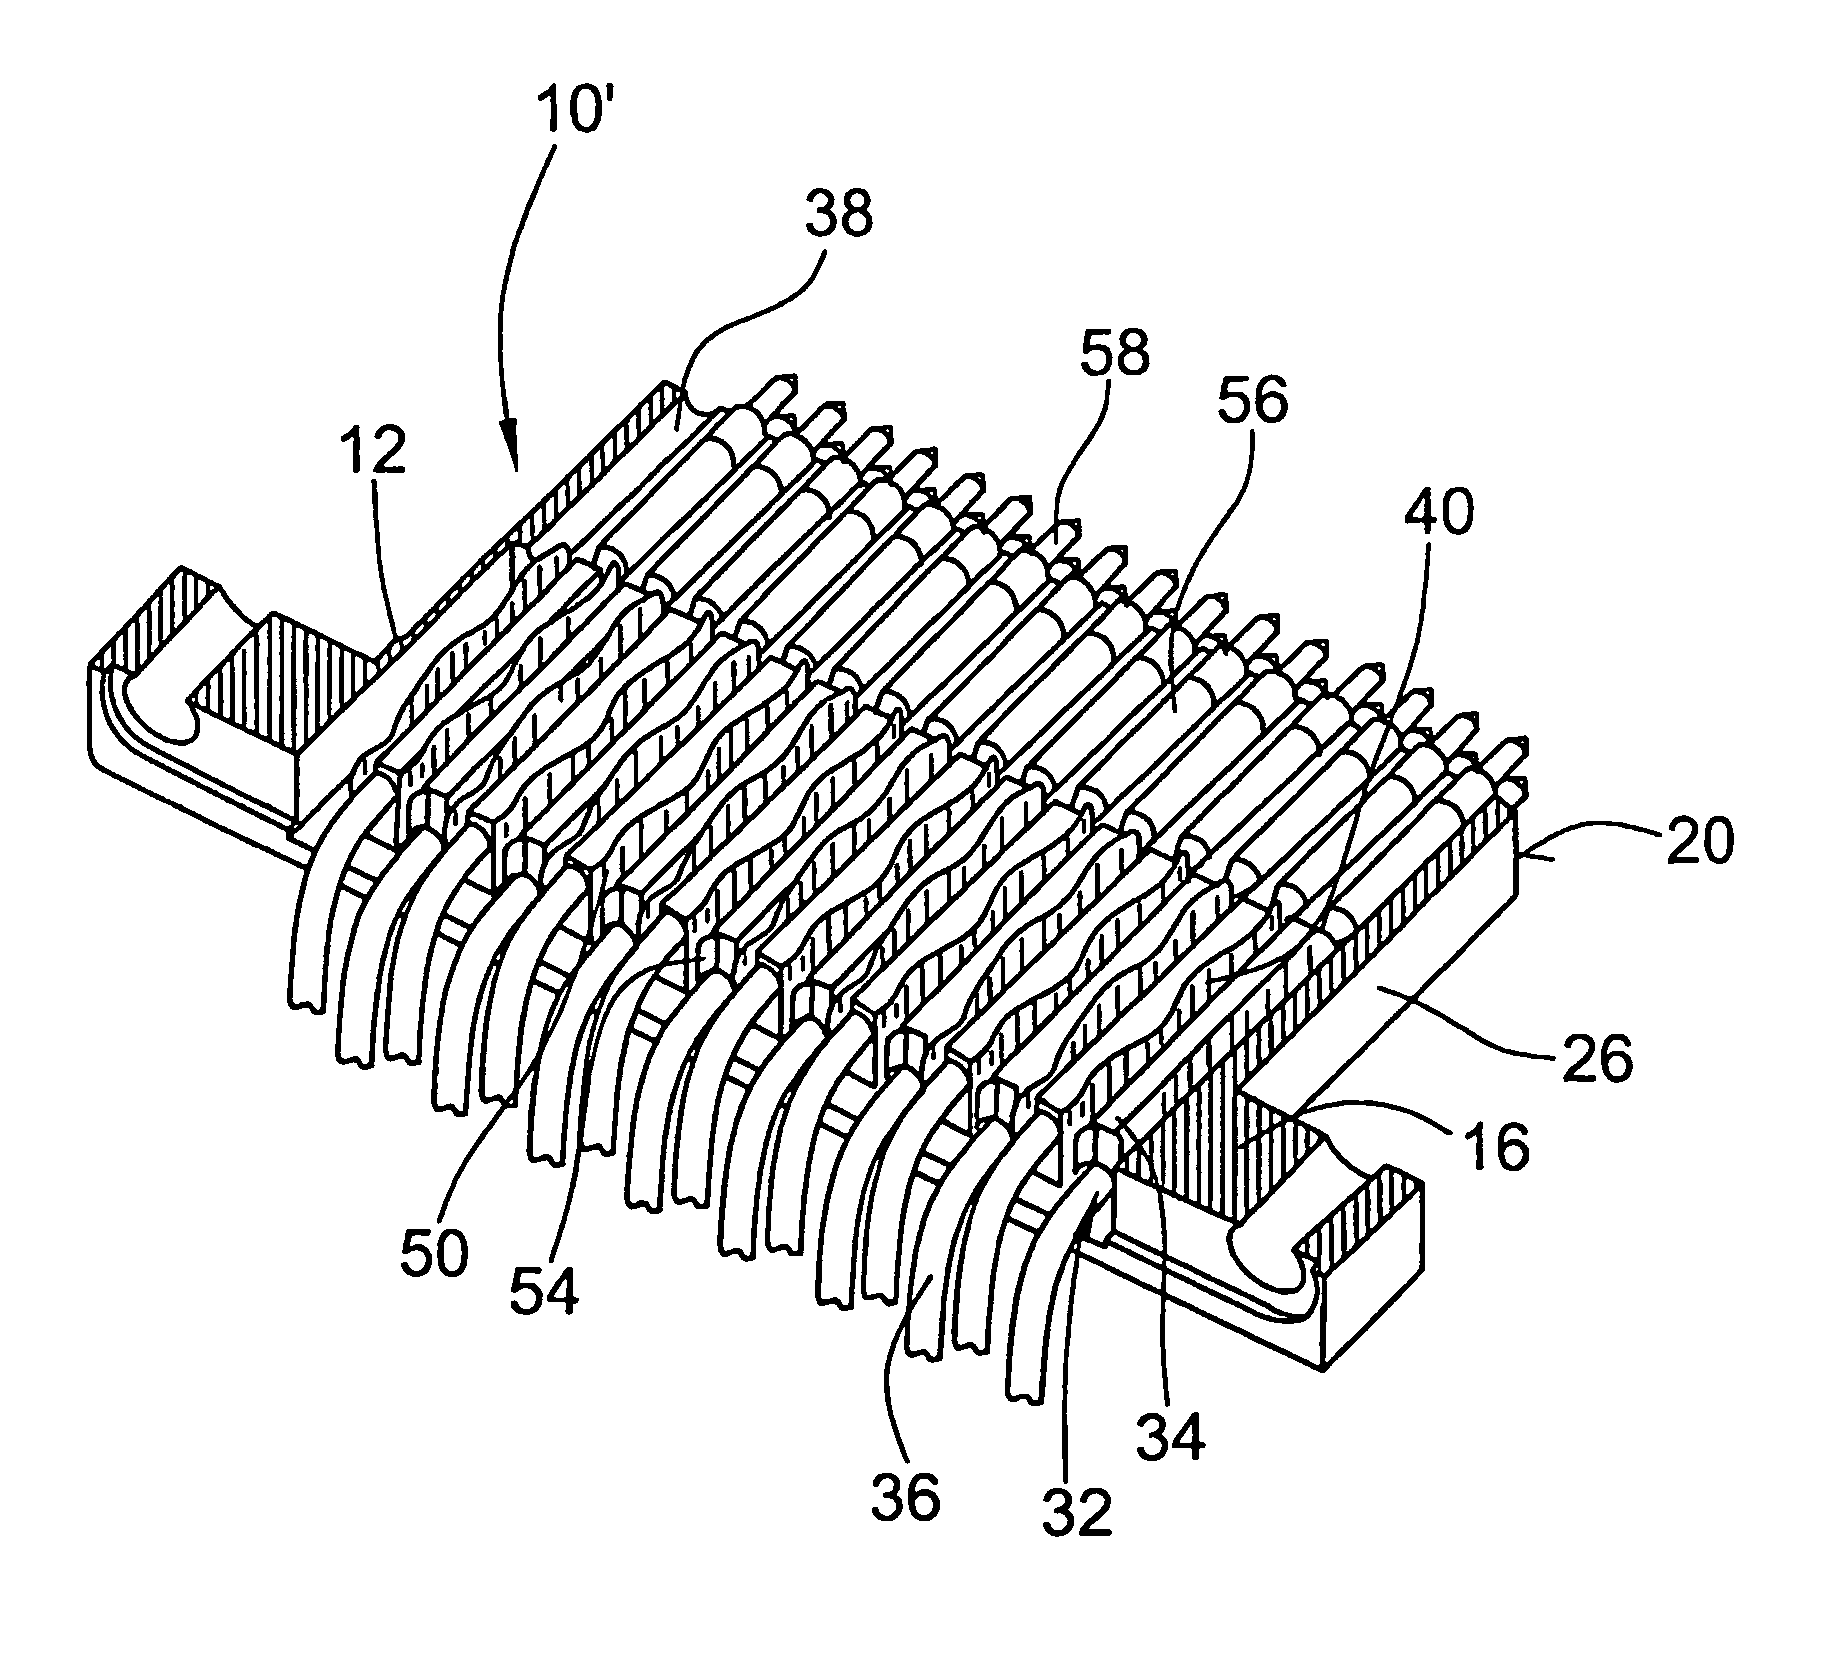 Socket connector for receiving a plurality of termination sockets for coaxial cables